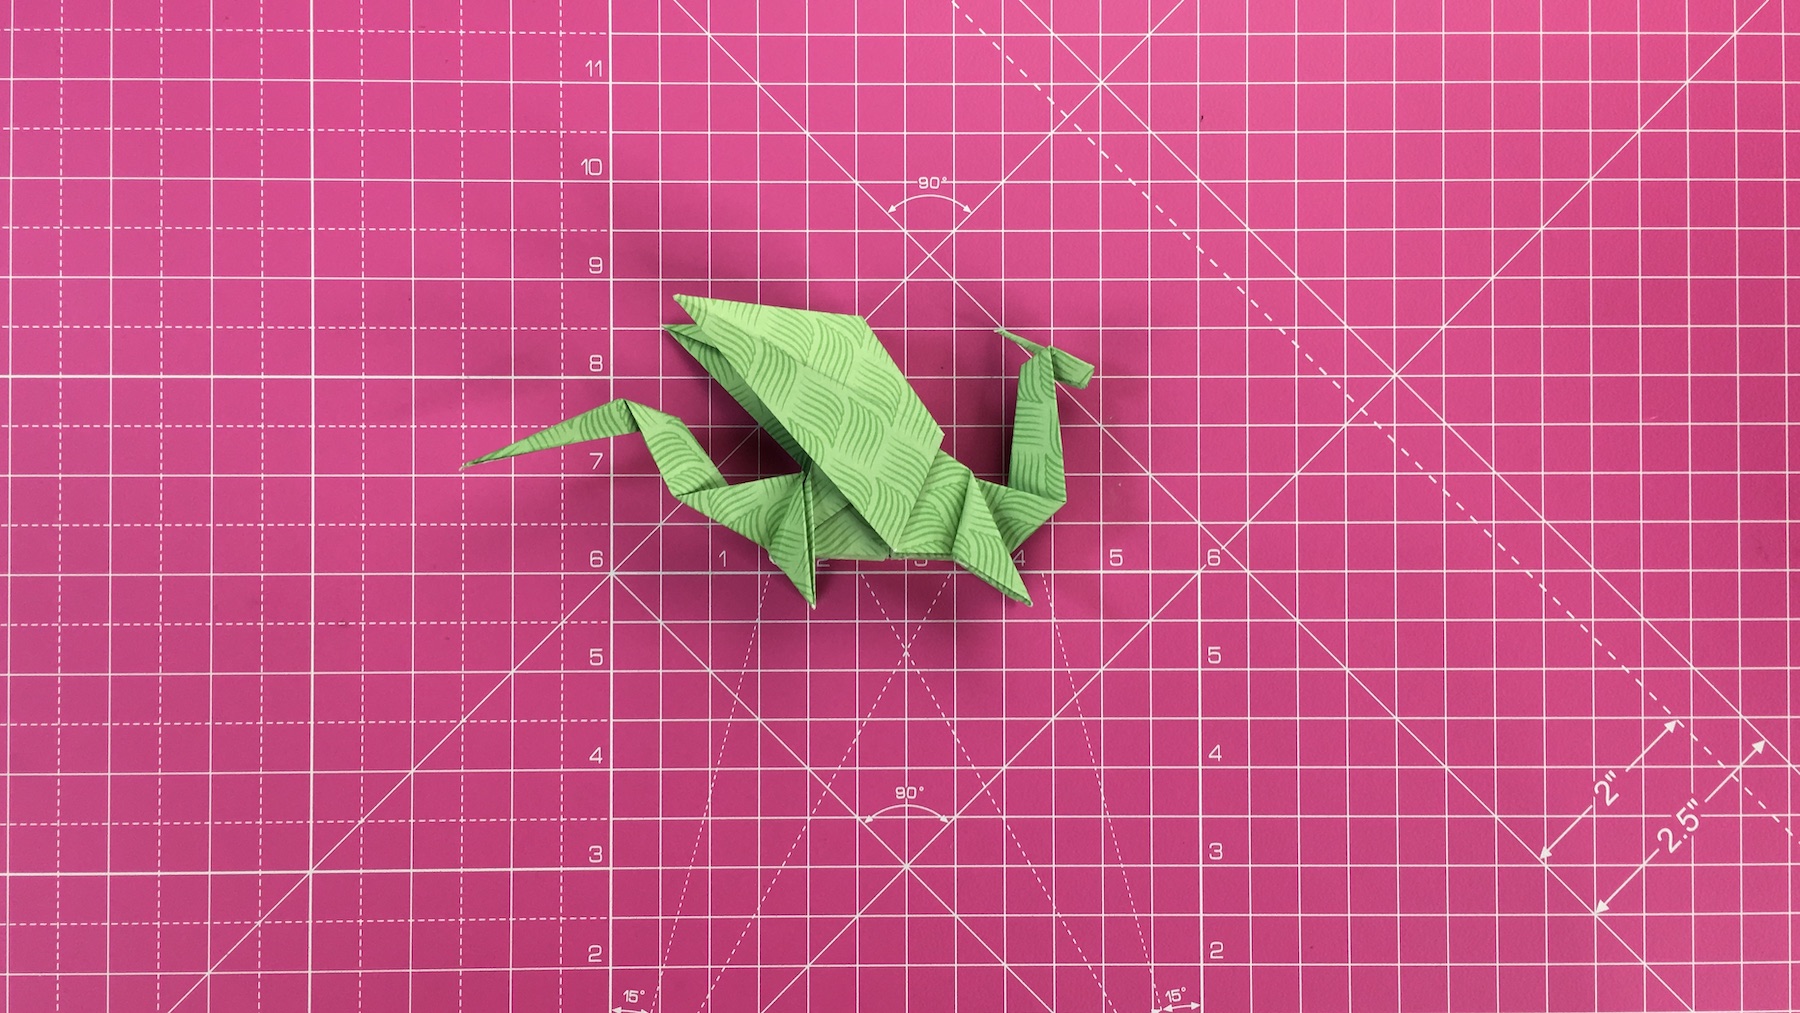 How to make an origami dragon, origami dragon tutorial - step 54b